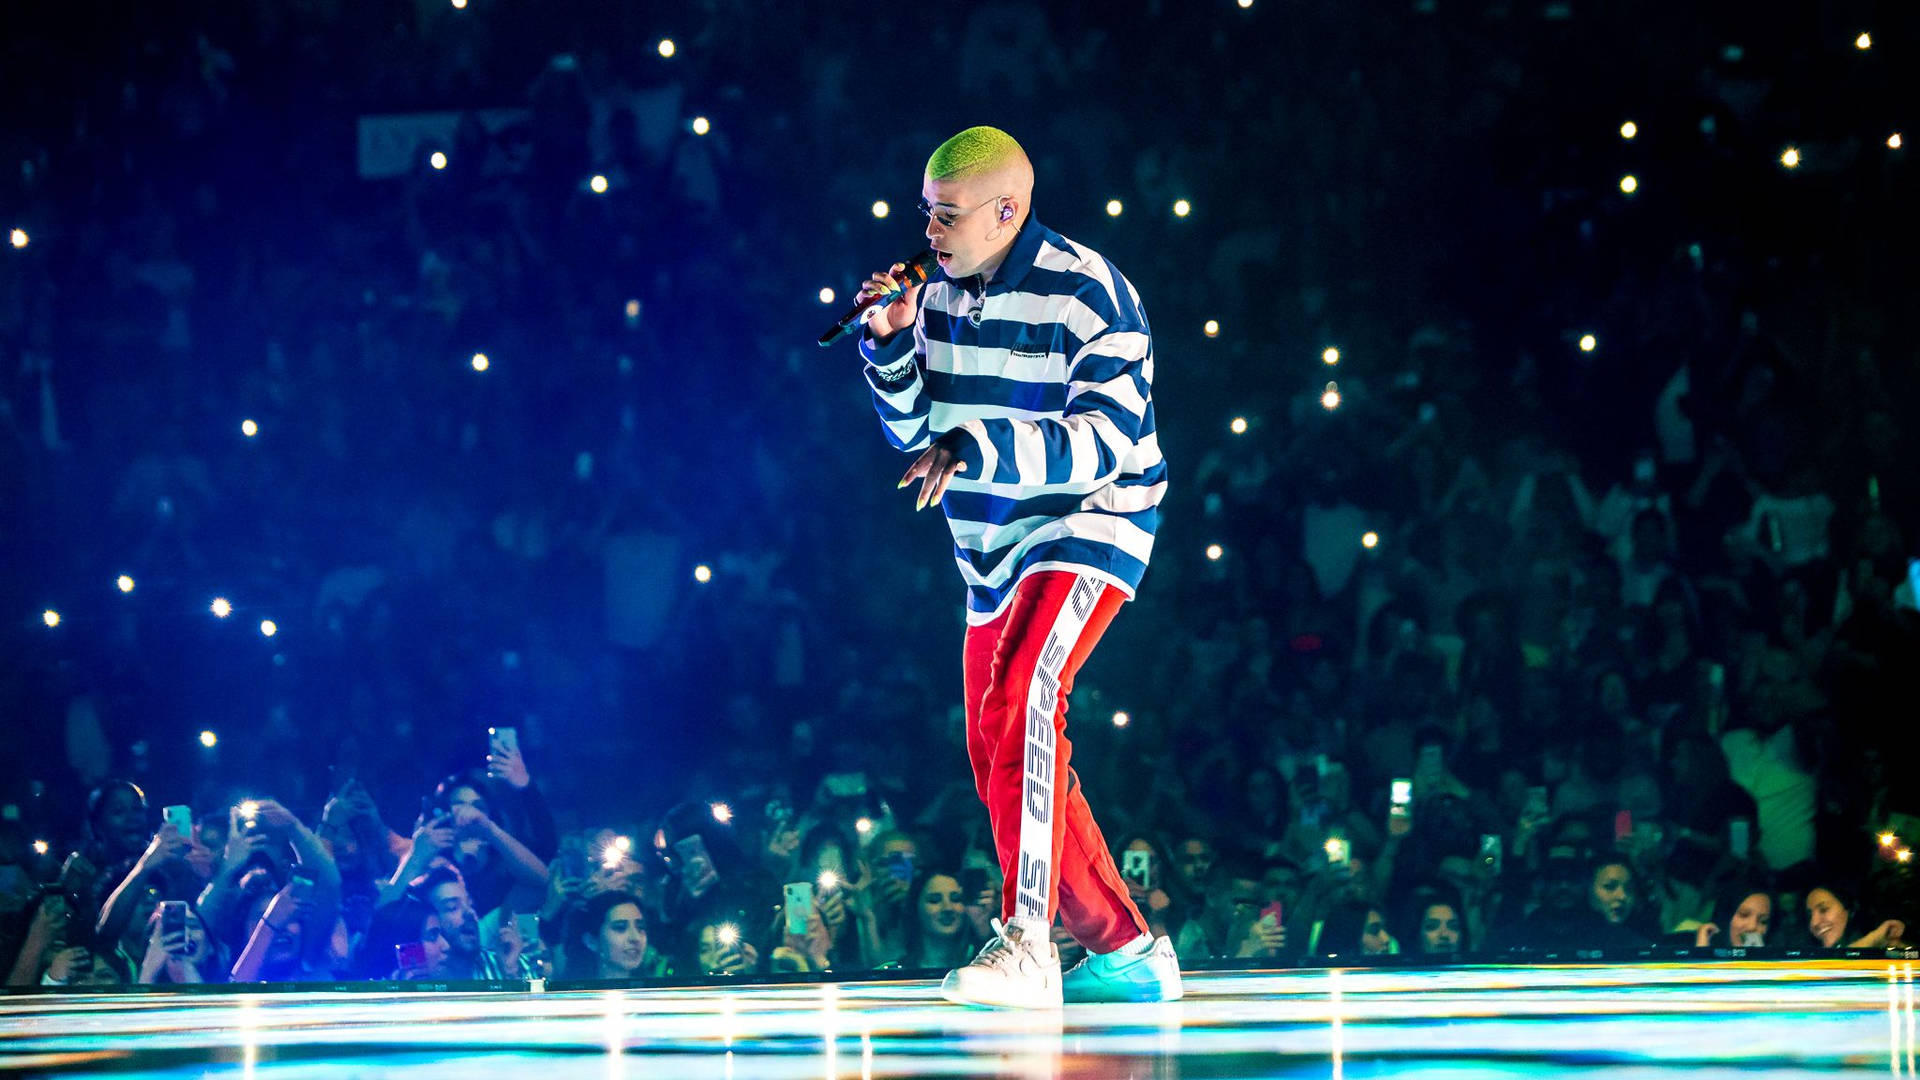 Bad Bunny On Stage With Fans Wallpaper